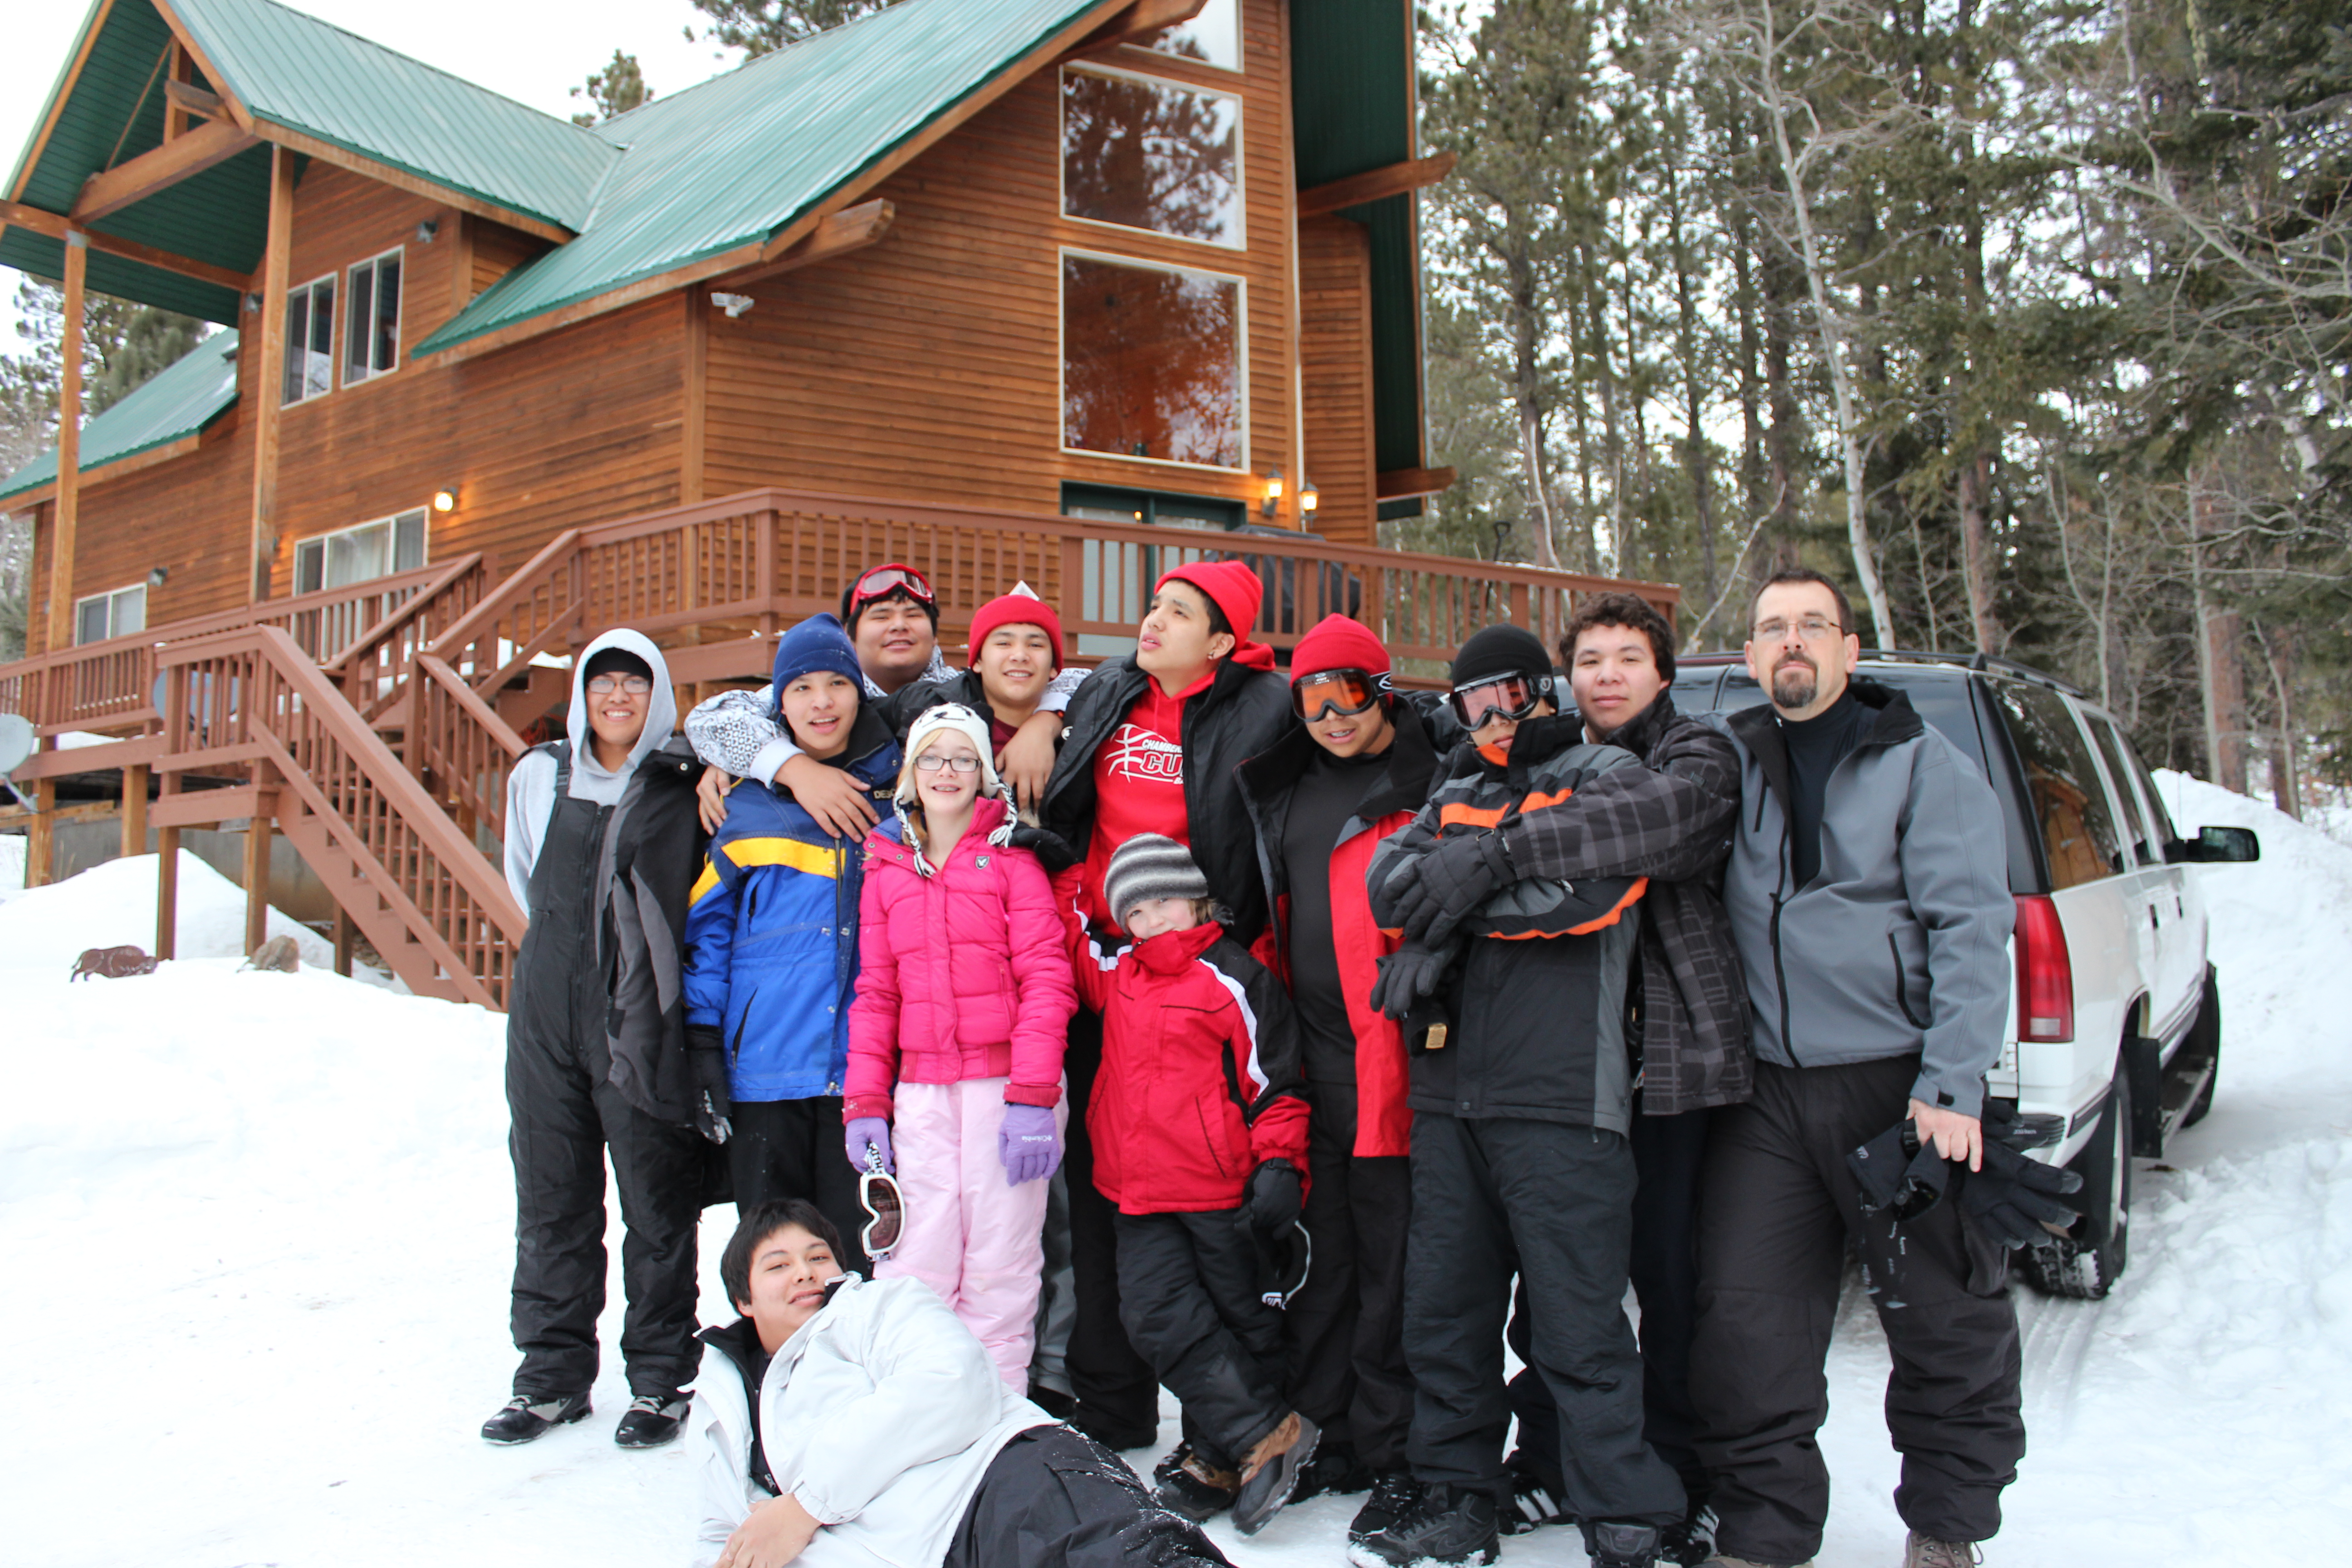 A group shot of the Carola Home on their skiing trip.